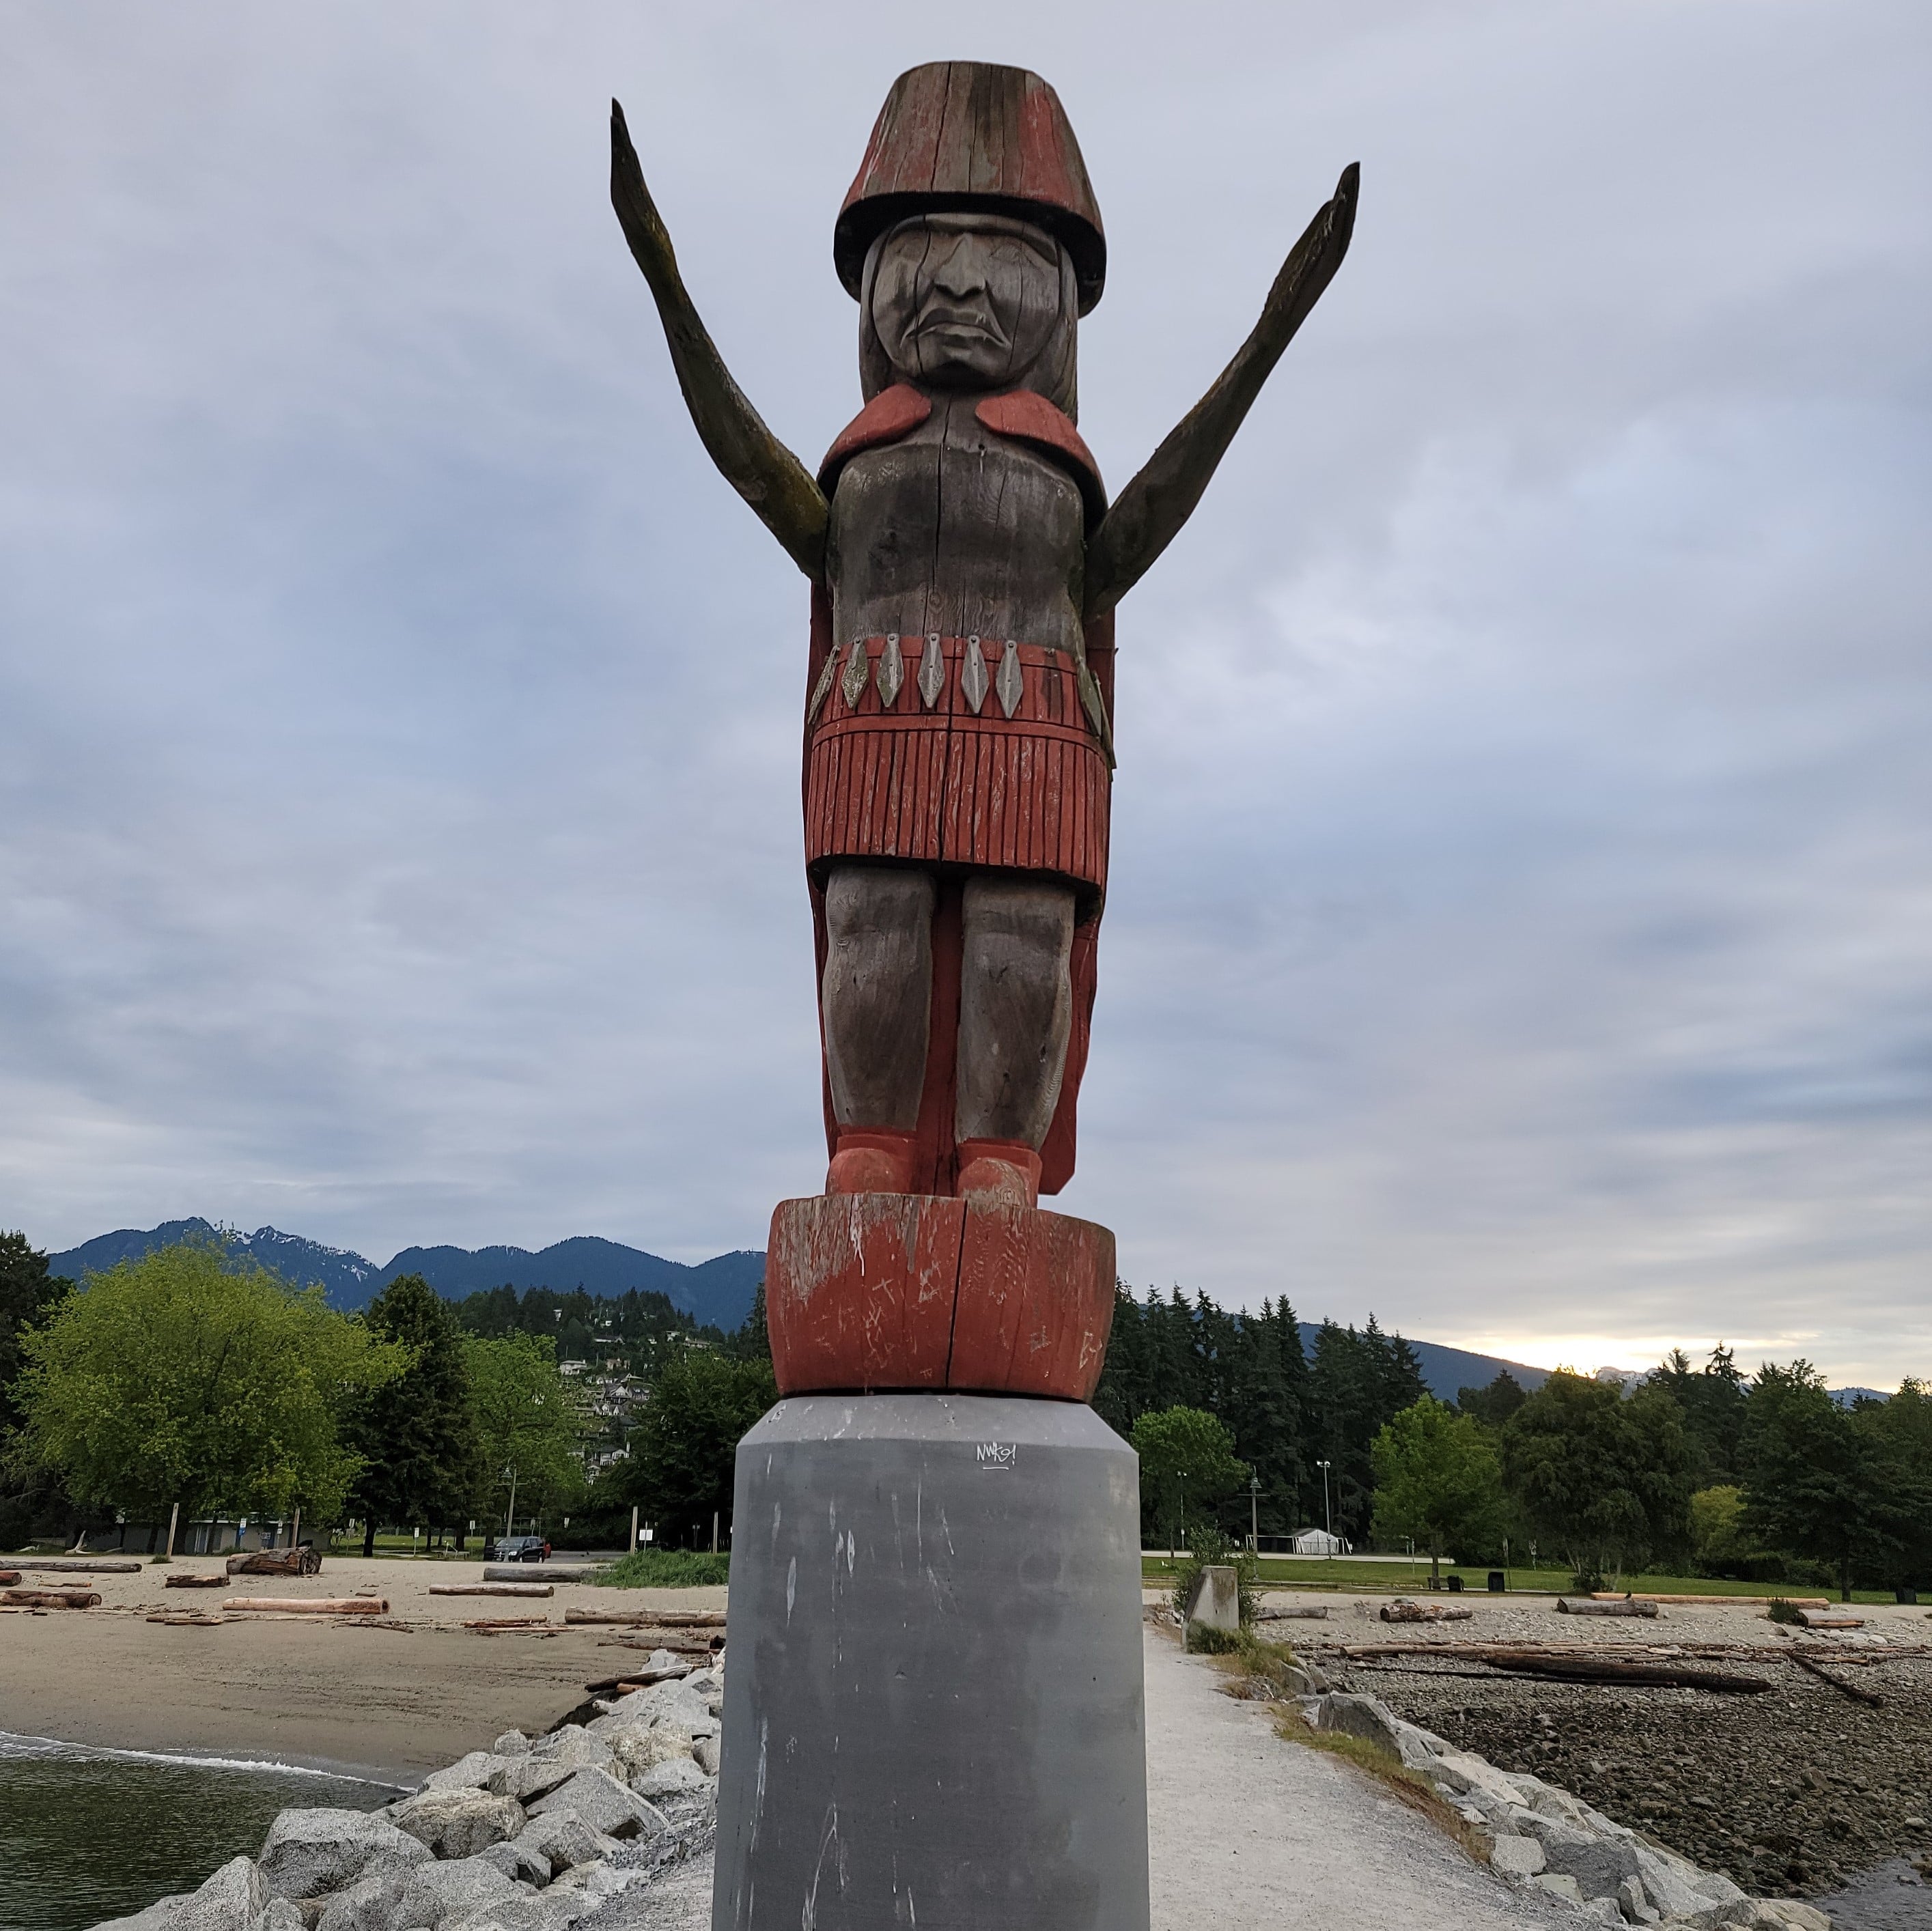 Welcoming Figure wood carving with arms raised on the shores of Squamish Nation